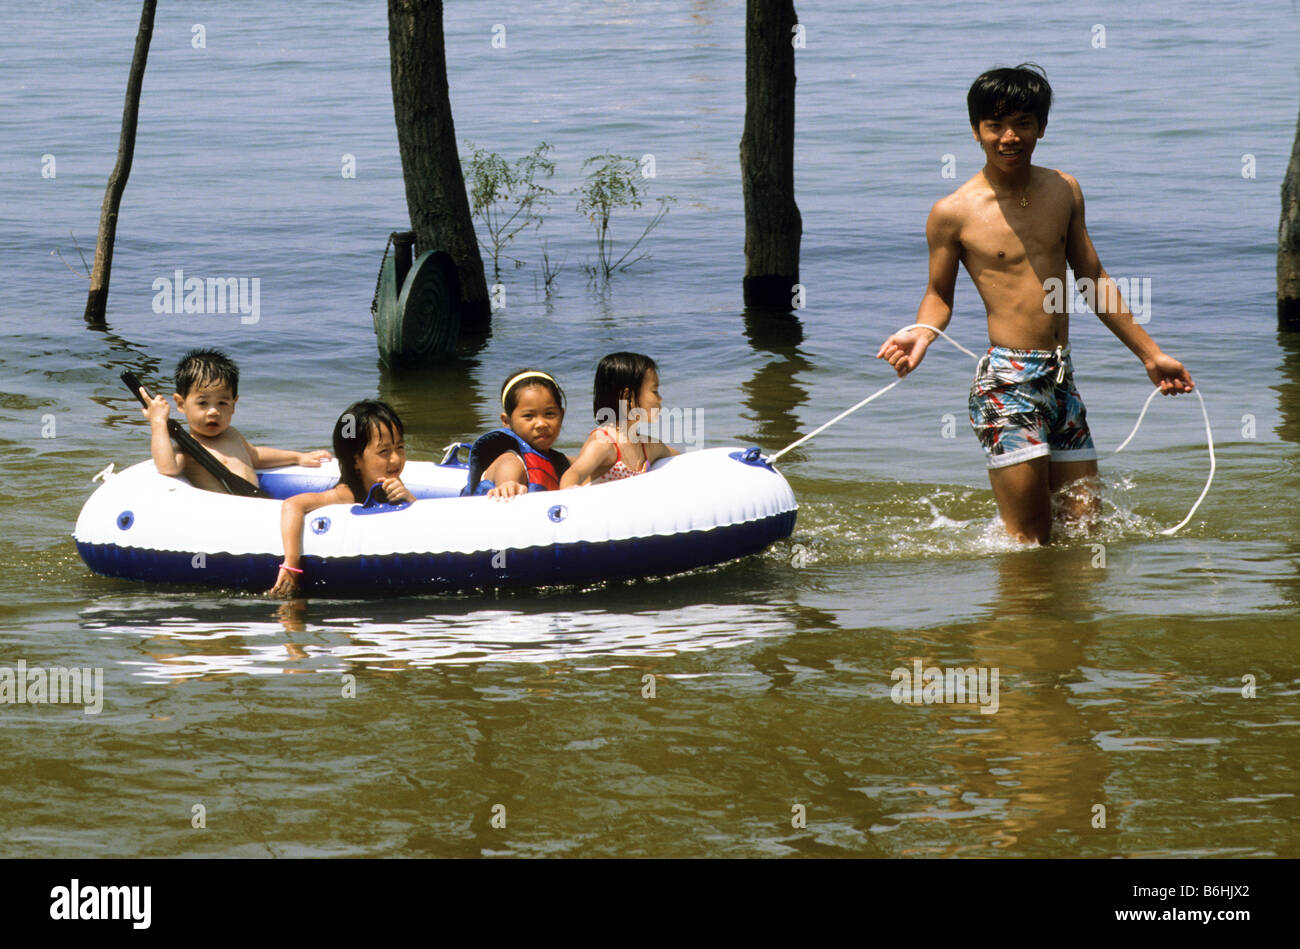 Asian man pulls inflated raft full of children in lake. Stock Photo